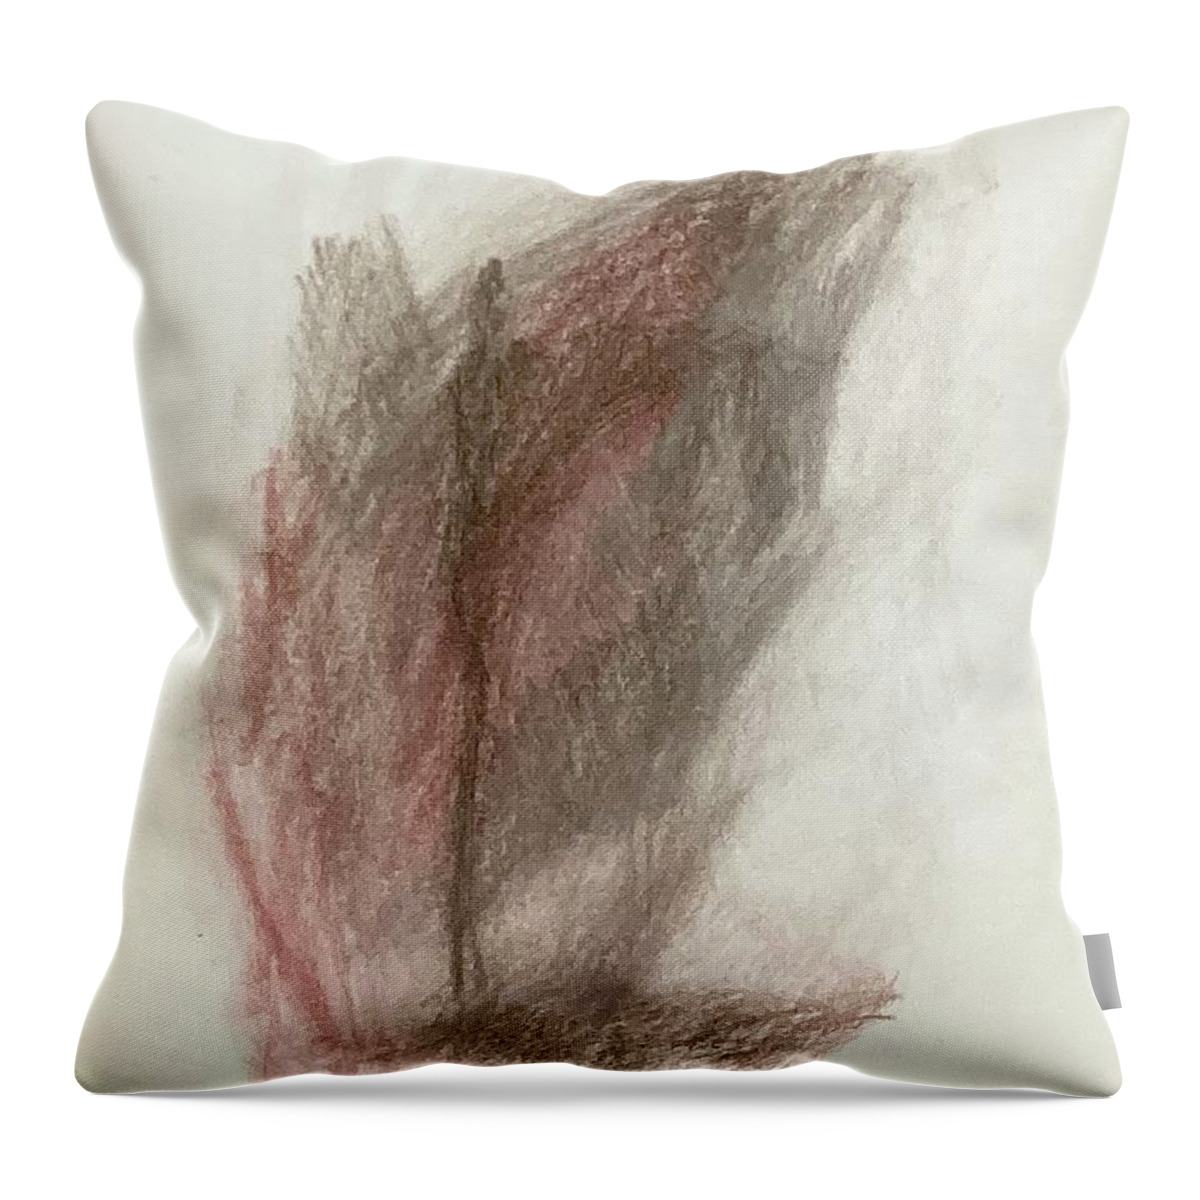 Watercolor Throw Pillow featuring the drawing Silhouettes V by David Euler